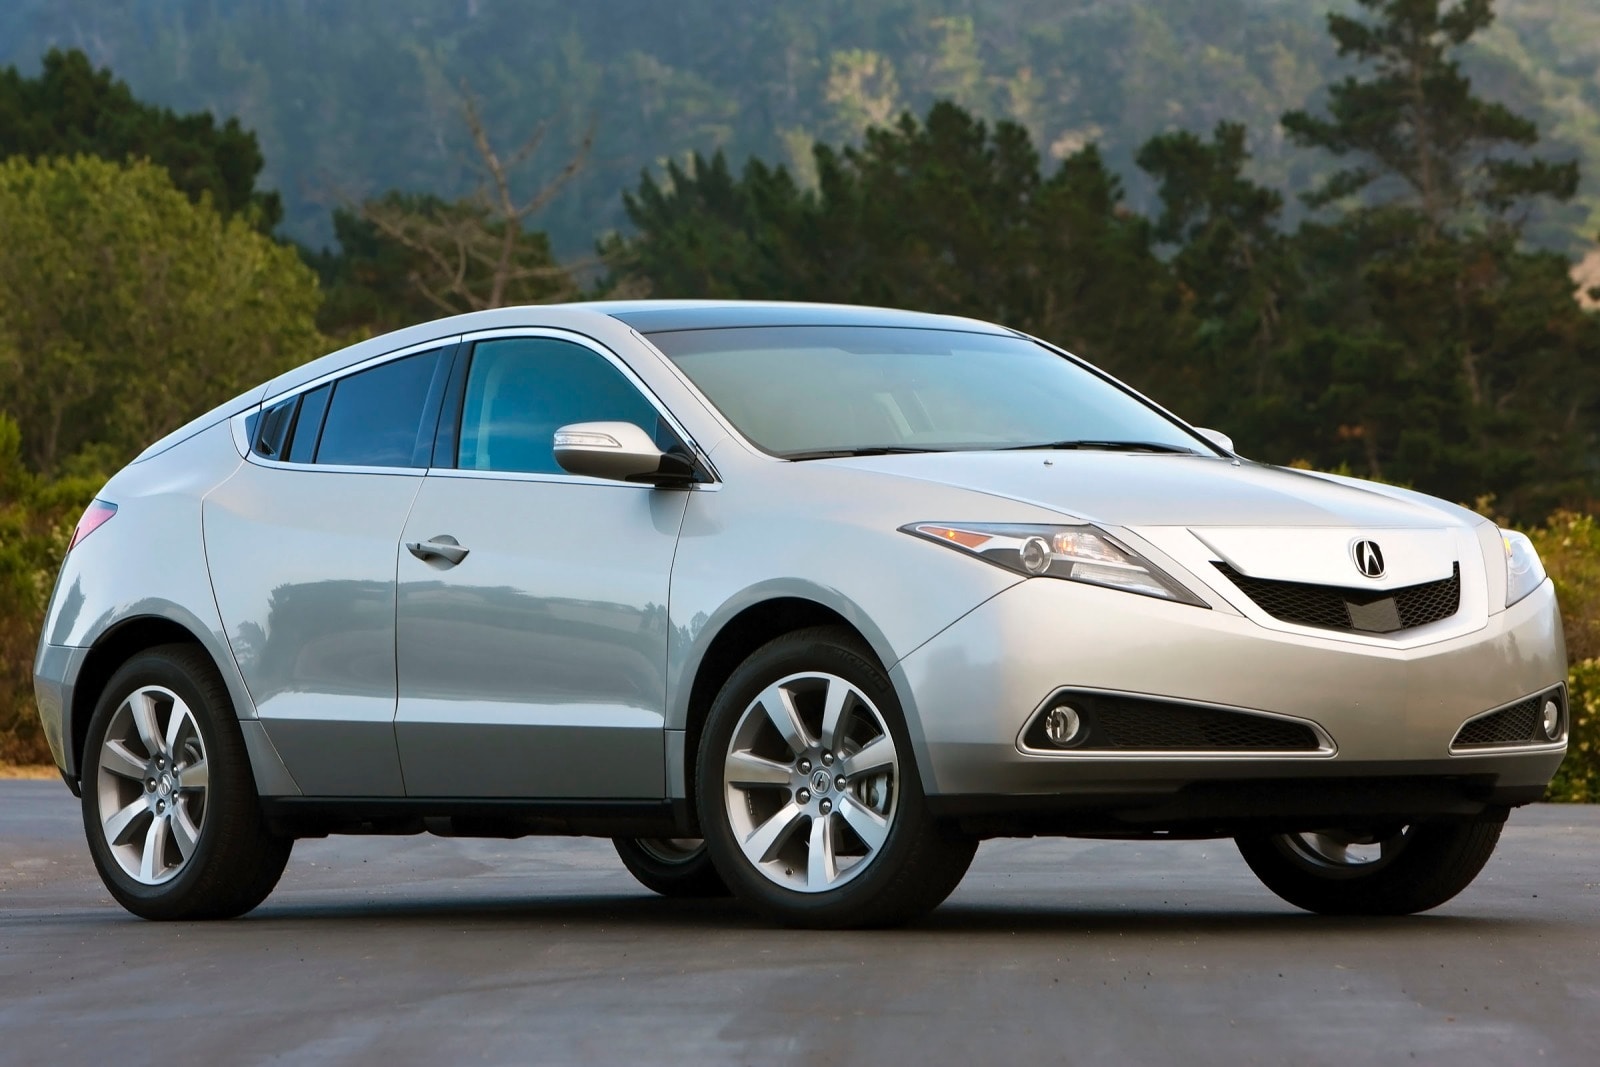 2010 Acura ZDX Review & Ratings | Edmunds